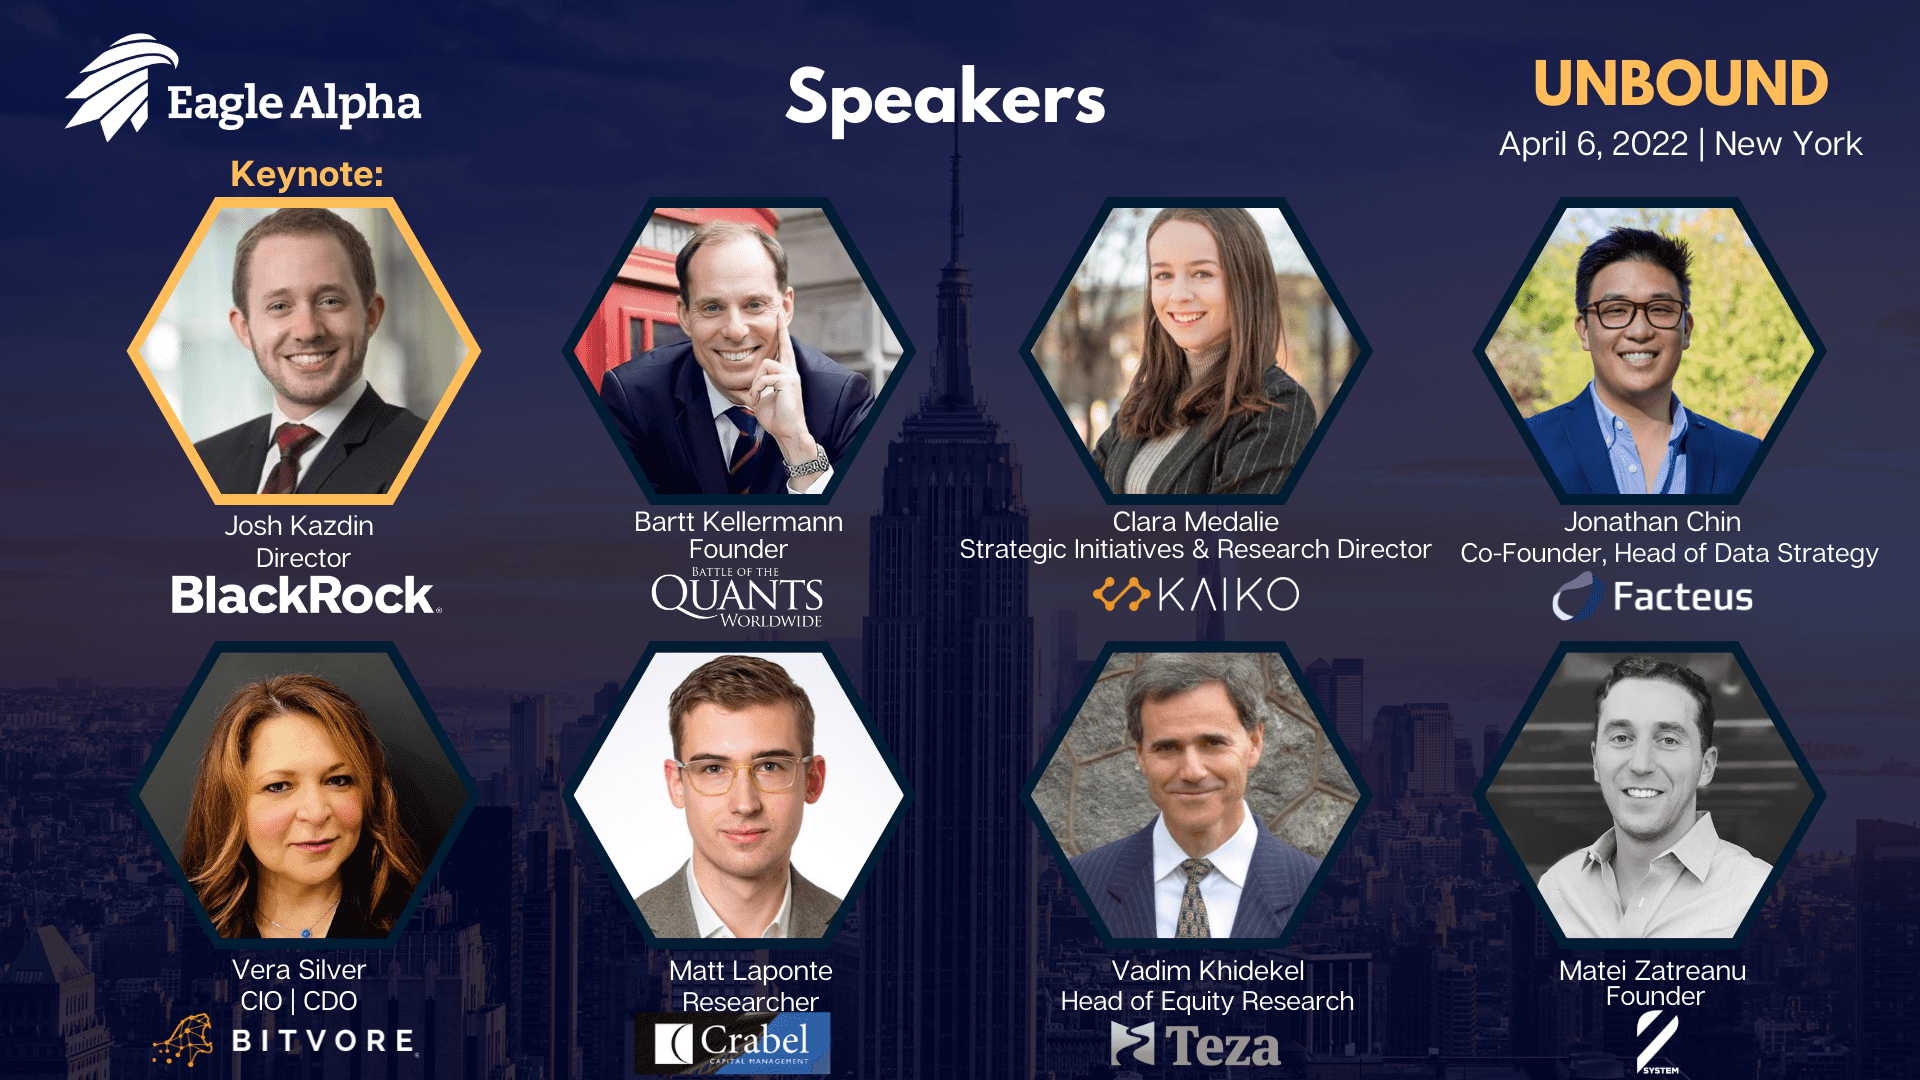 Bitvore CIO Vera Silver to Speak at UNBOUND Conference on April 6th in NYC